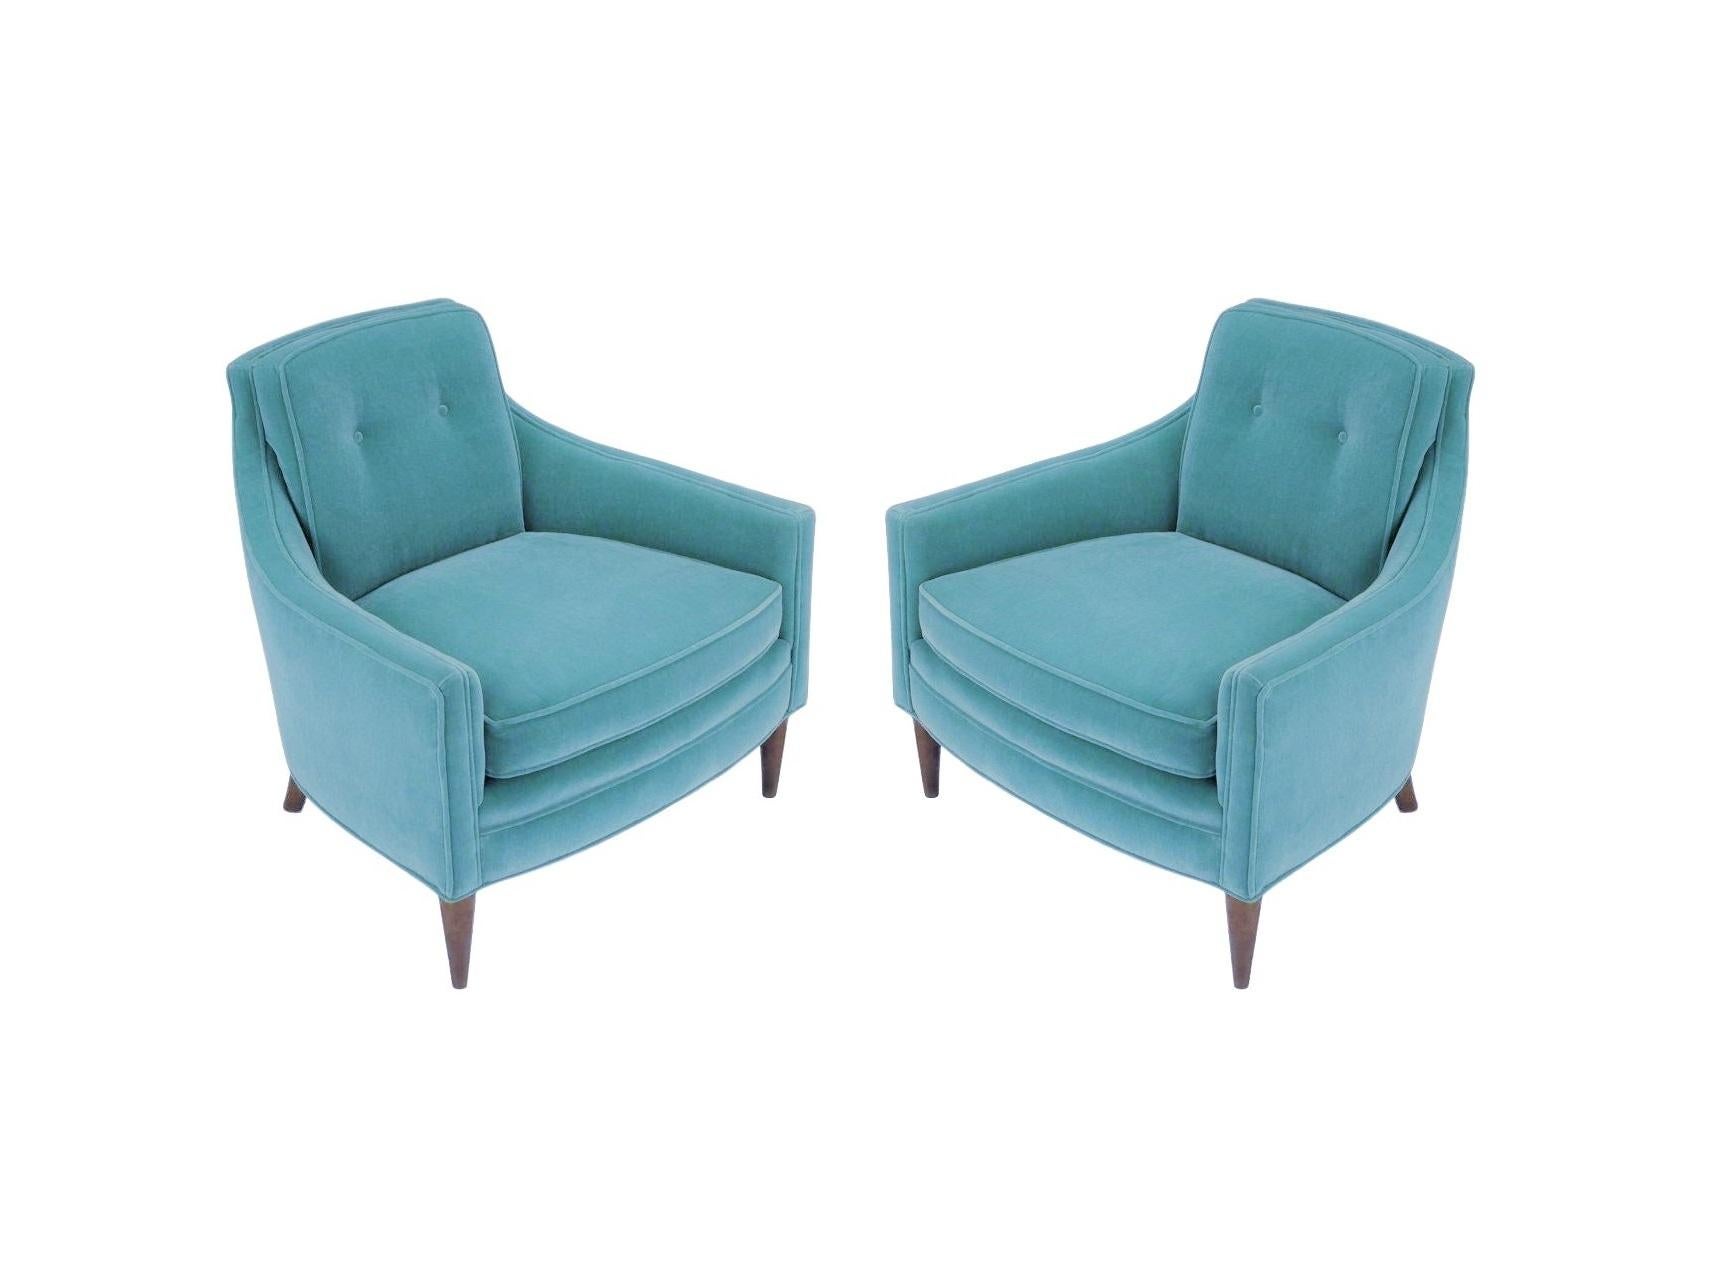 Mid-Century Modern 1950s Curved Back Club Chairs Freshly Reupholstered in Blue Mohair For Sale